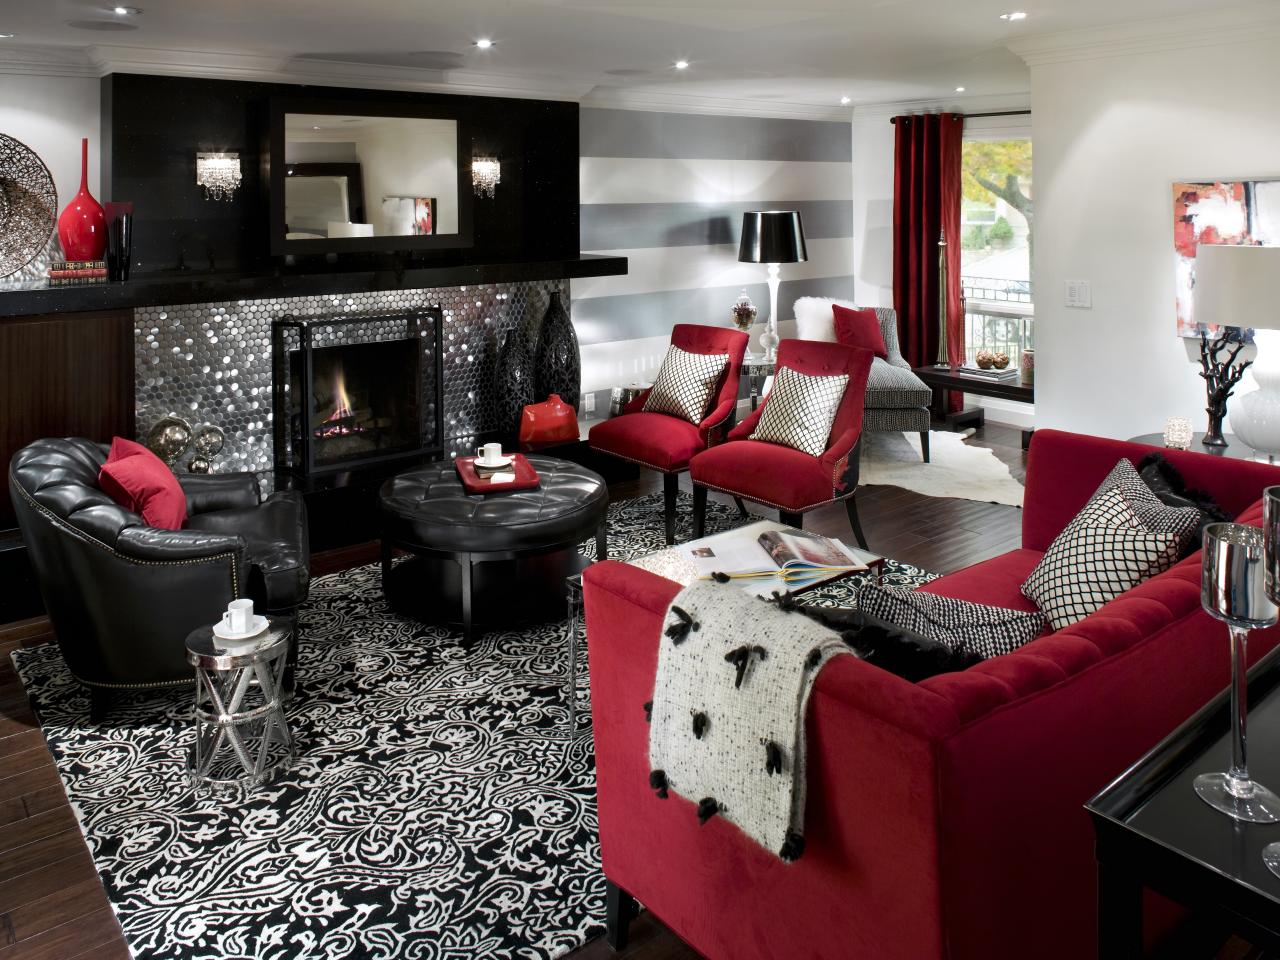 Captivating red and black living room